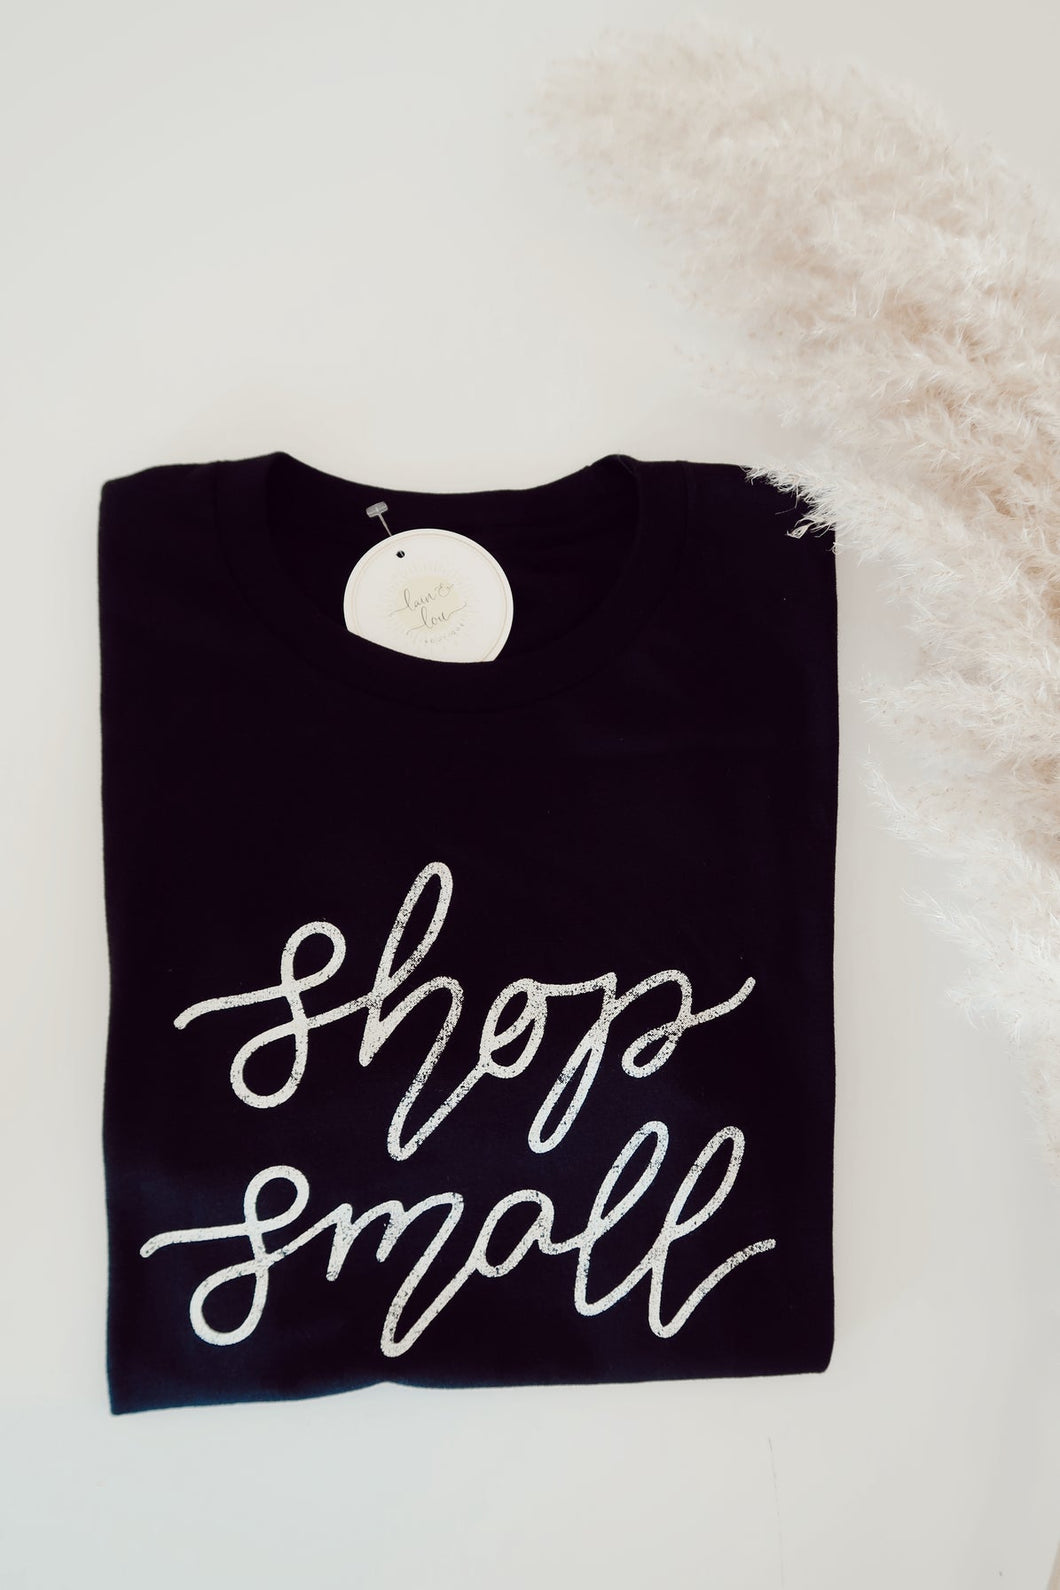 Shop Small + Small Business Love BUNDLE